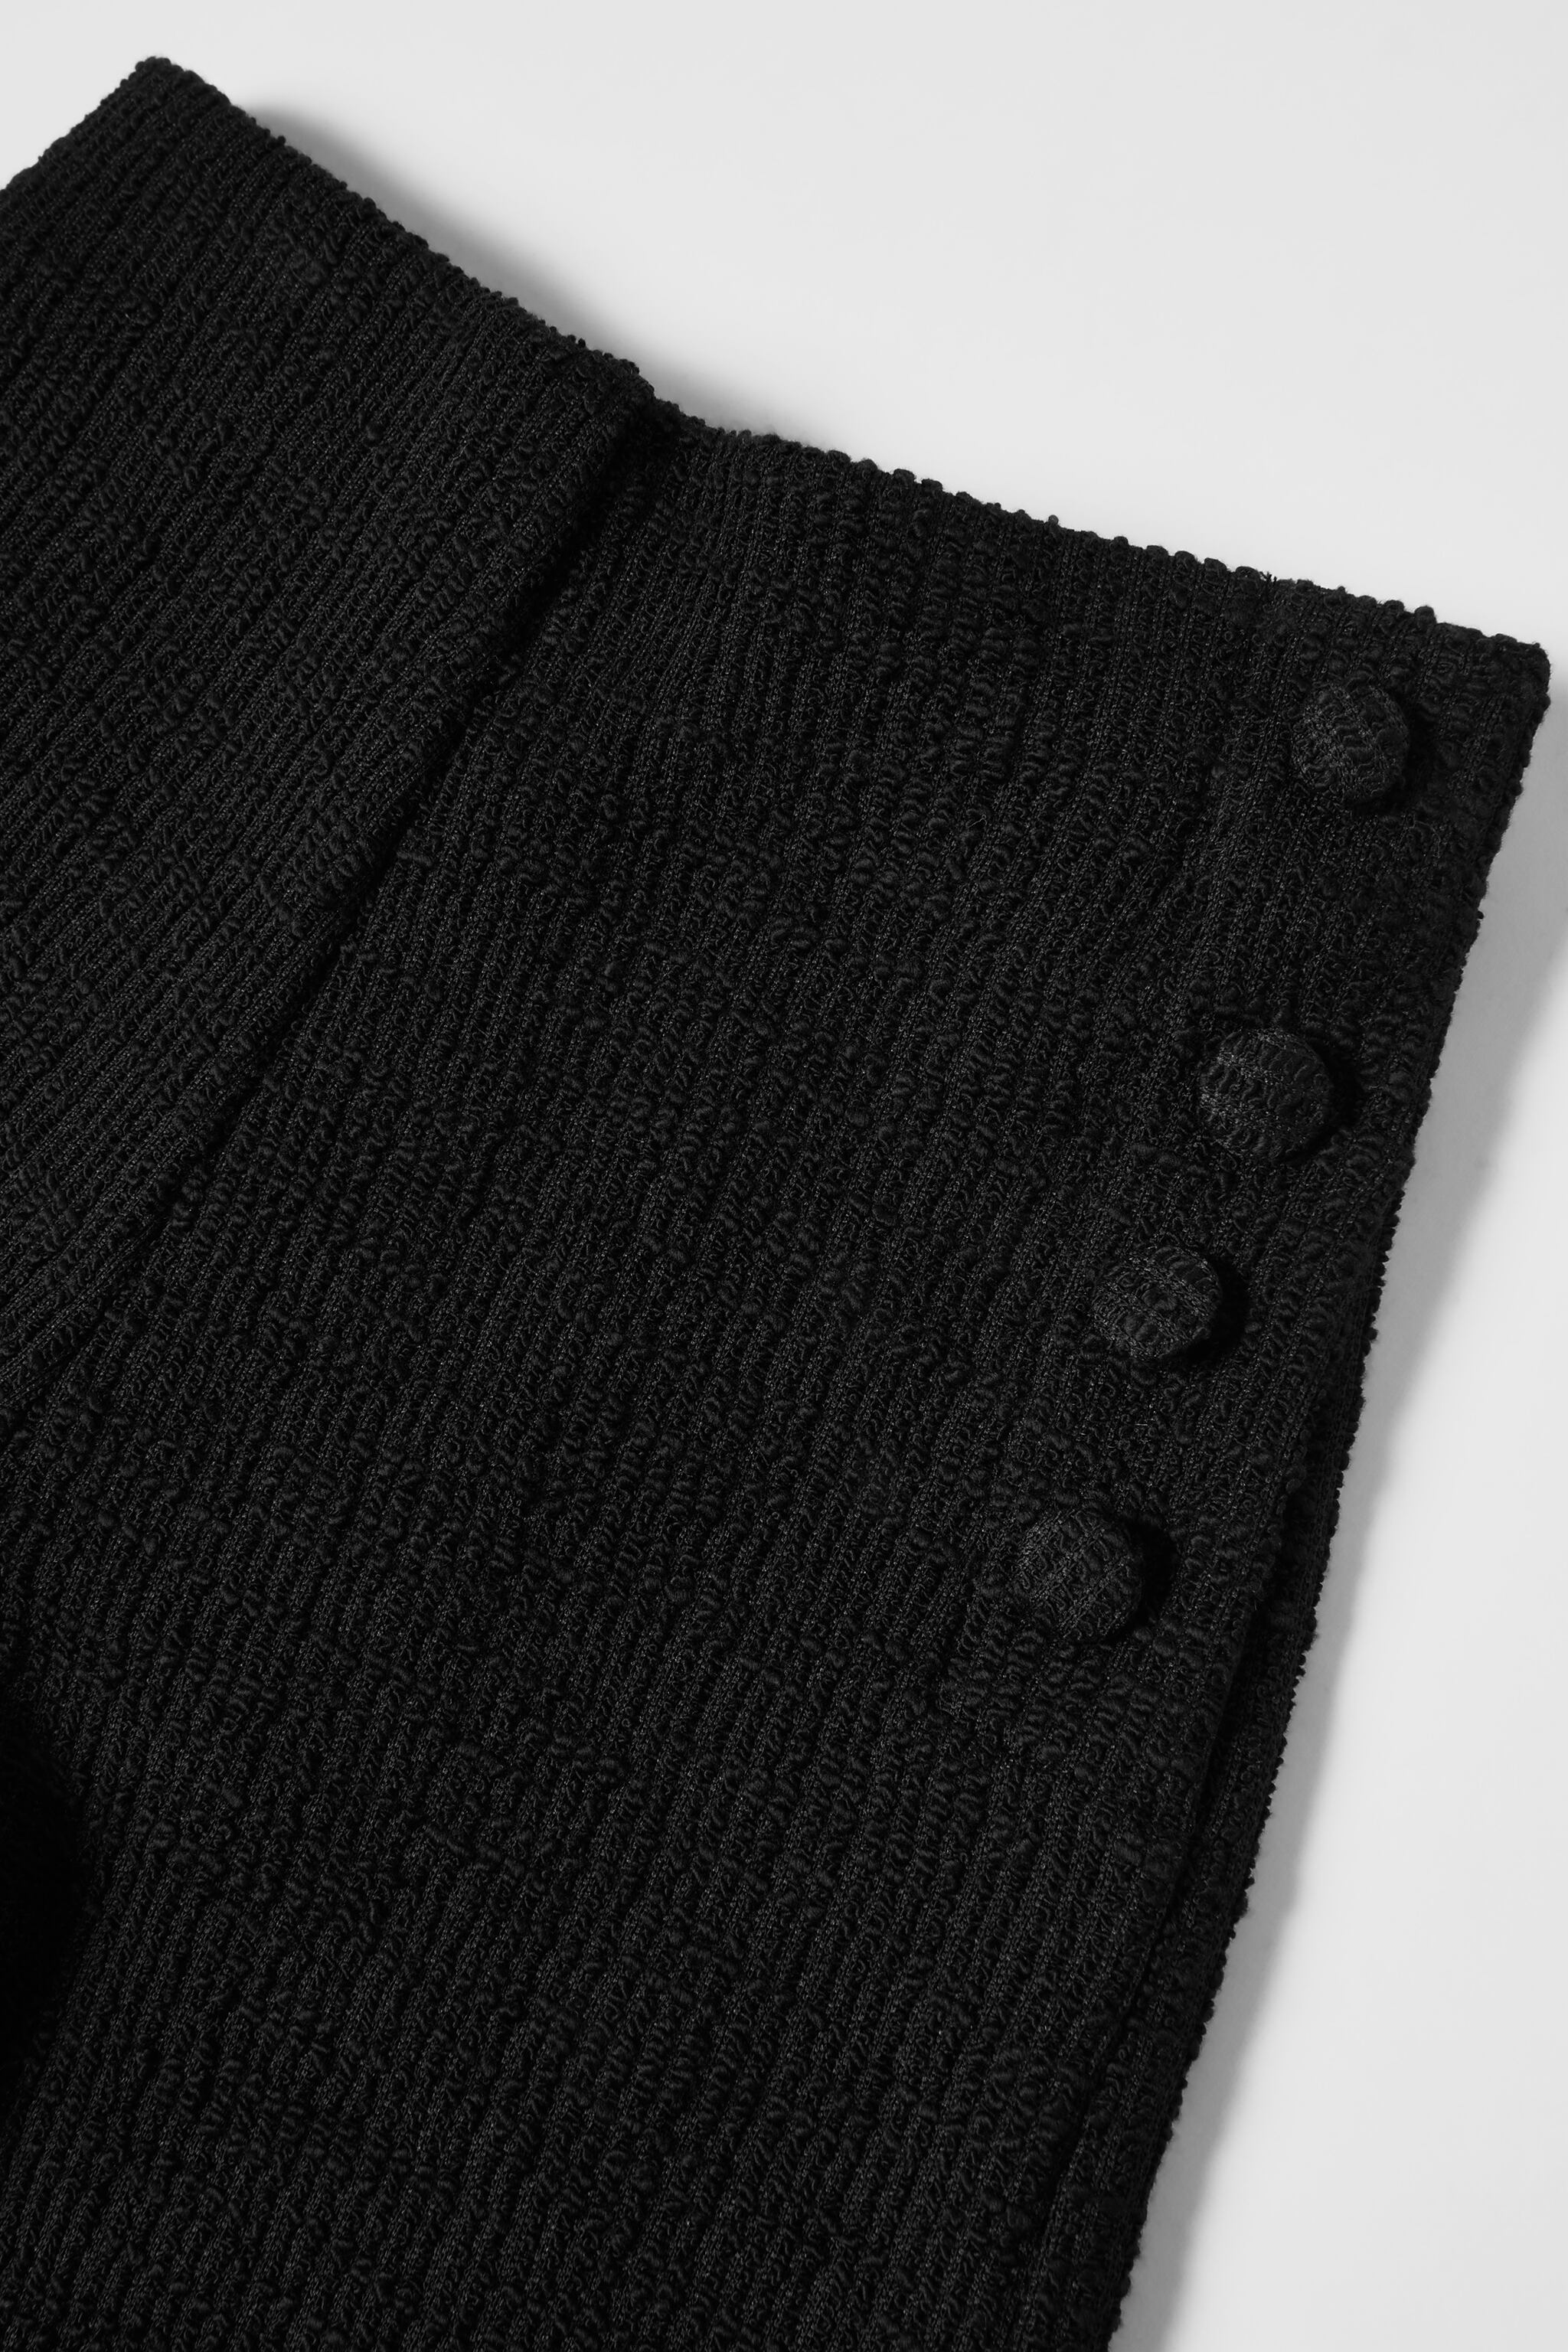 TEXTURED WEAVE PANTS WITH BUTTONS